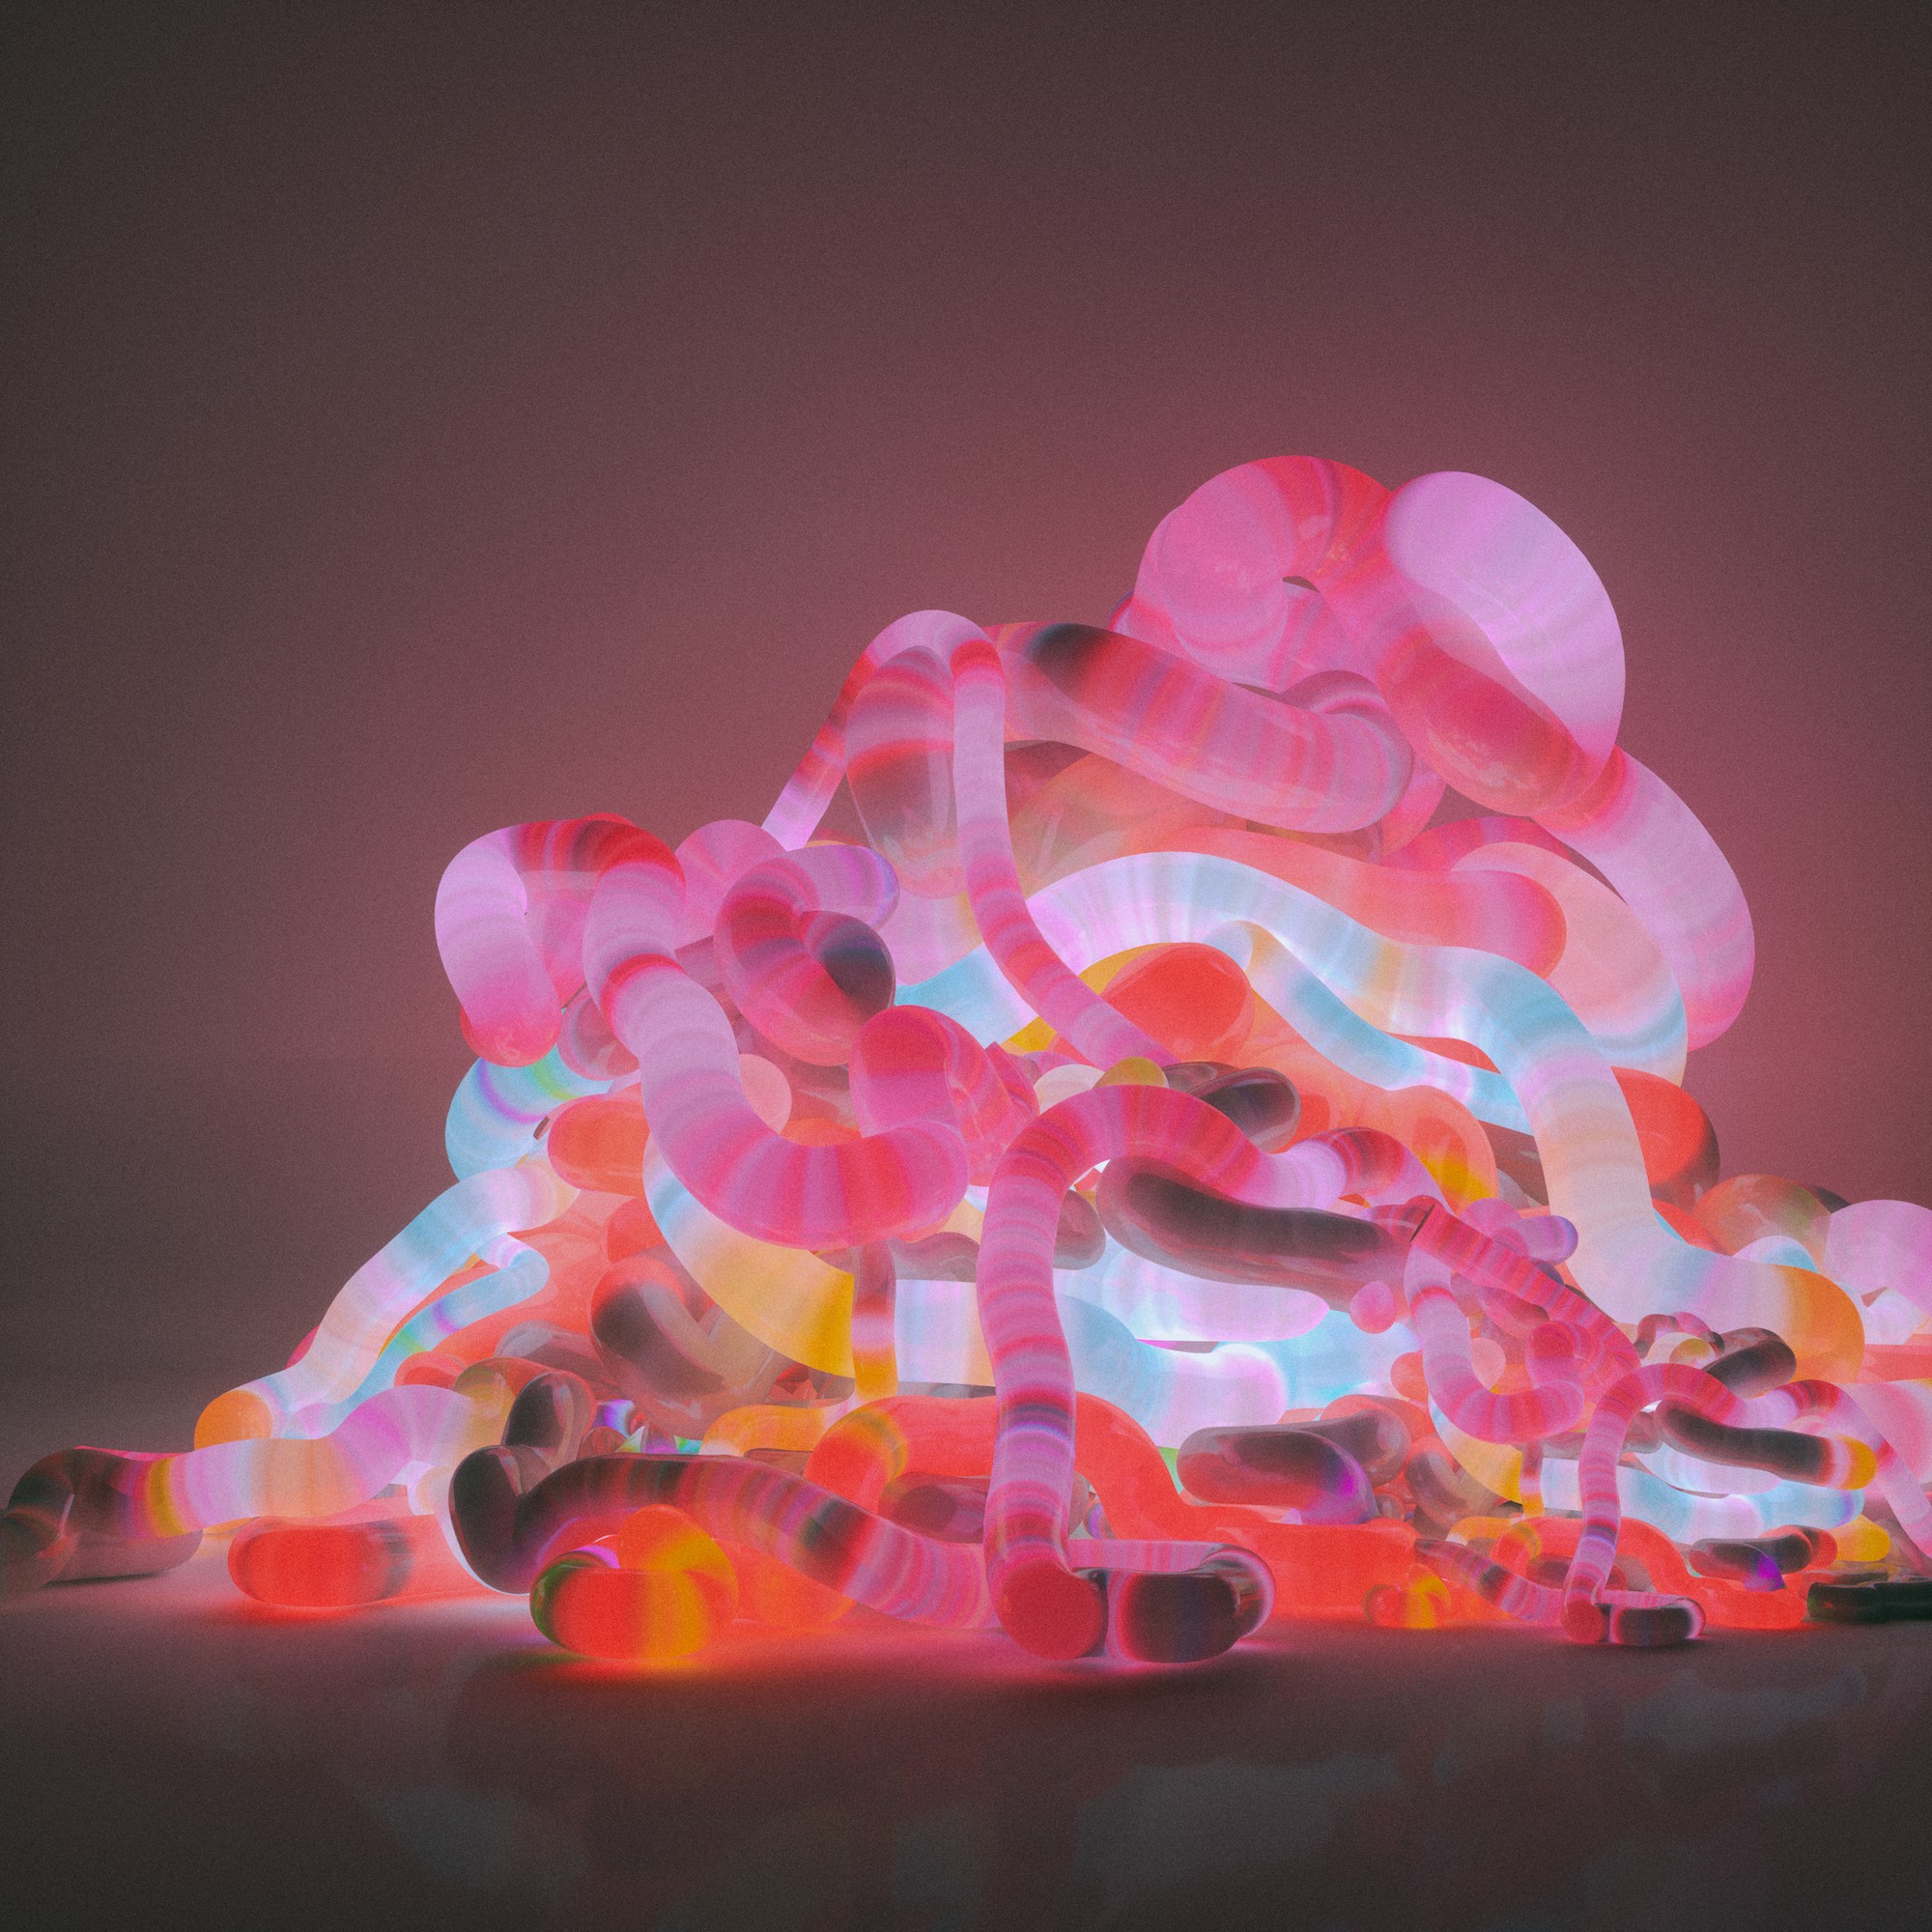 How Beeple's Commitment to Creating Art Every Day Led to Huge